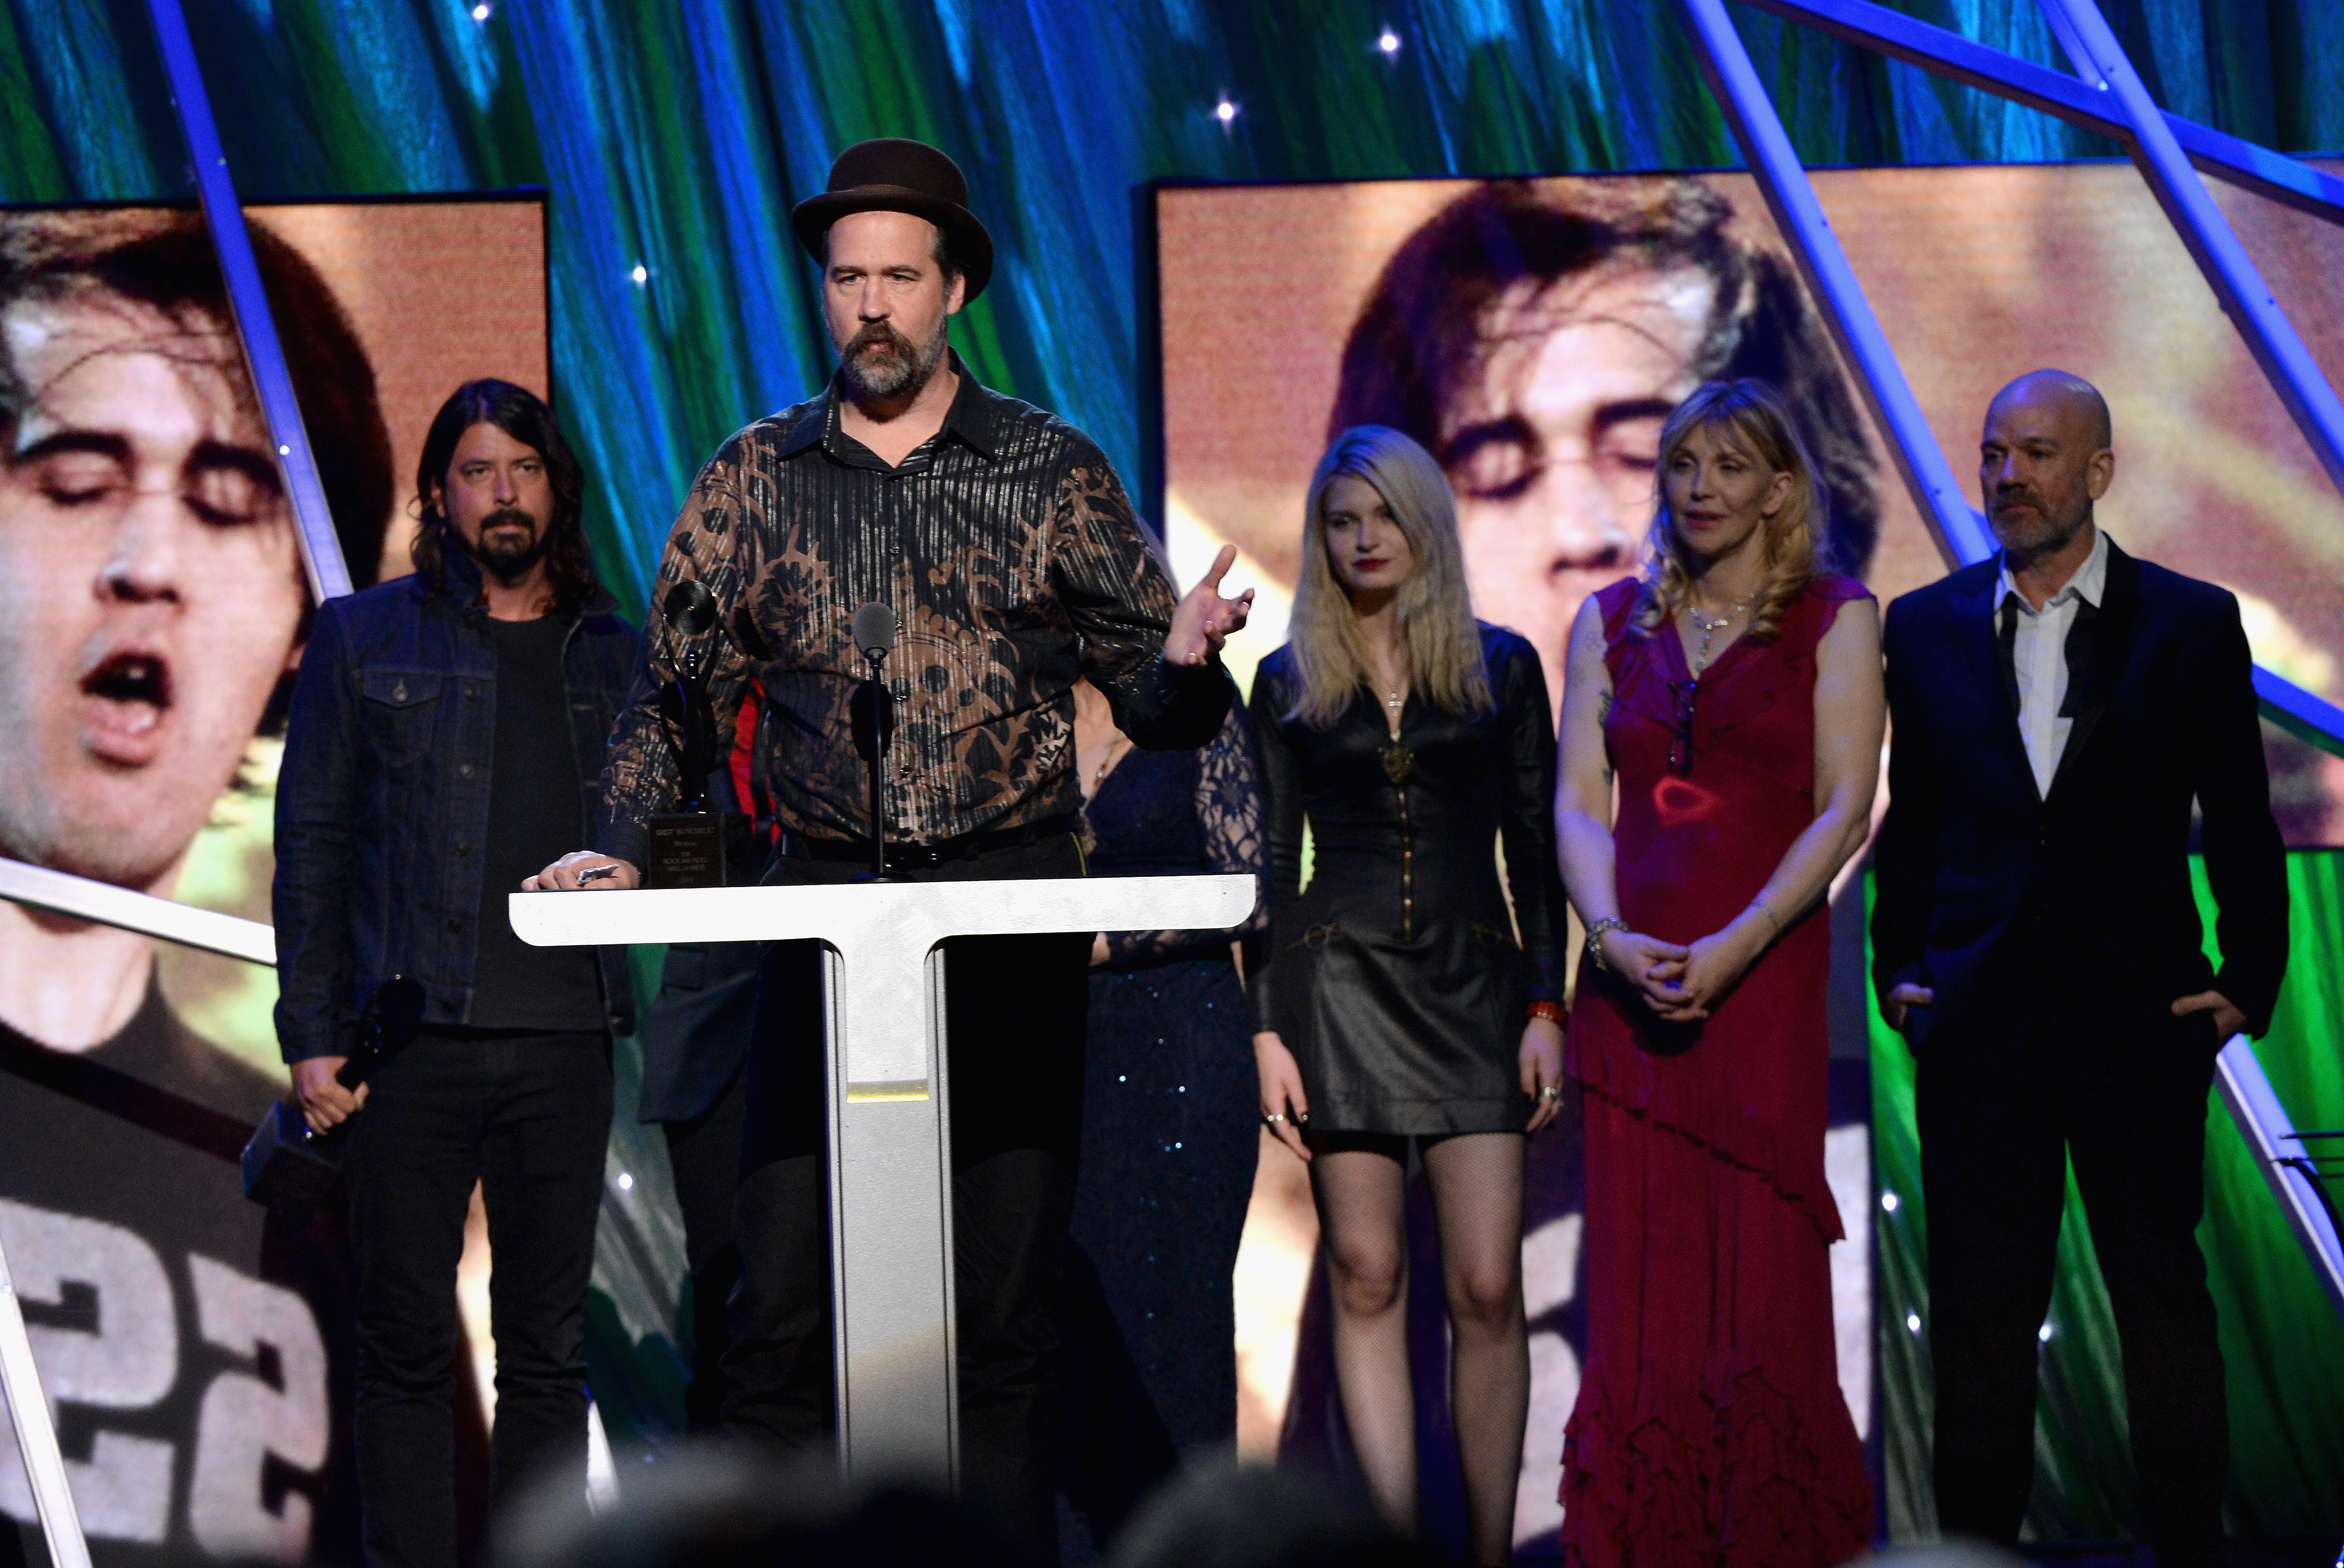 Krist Novoselic of Nirvana speaks onstage at the 29th Annual Rock And Roll Hall Of Fame Induction Ceremony at Barclays Center of Brooklyn on April 10, 2014 in New York City. (Larry Busacca—Getty Images)